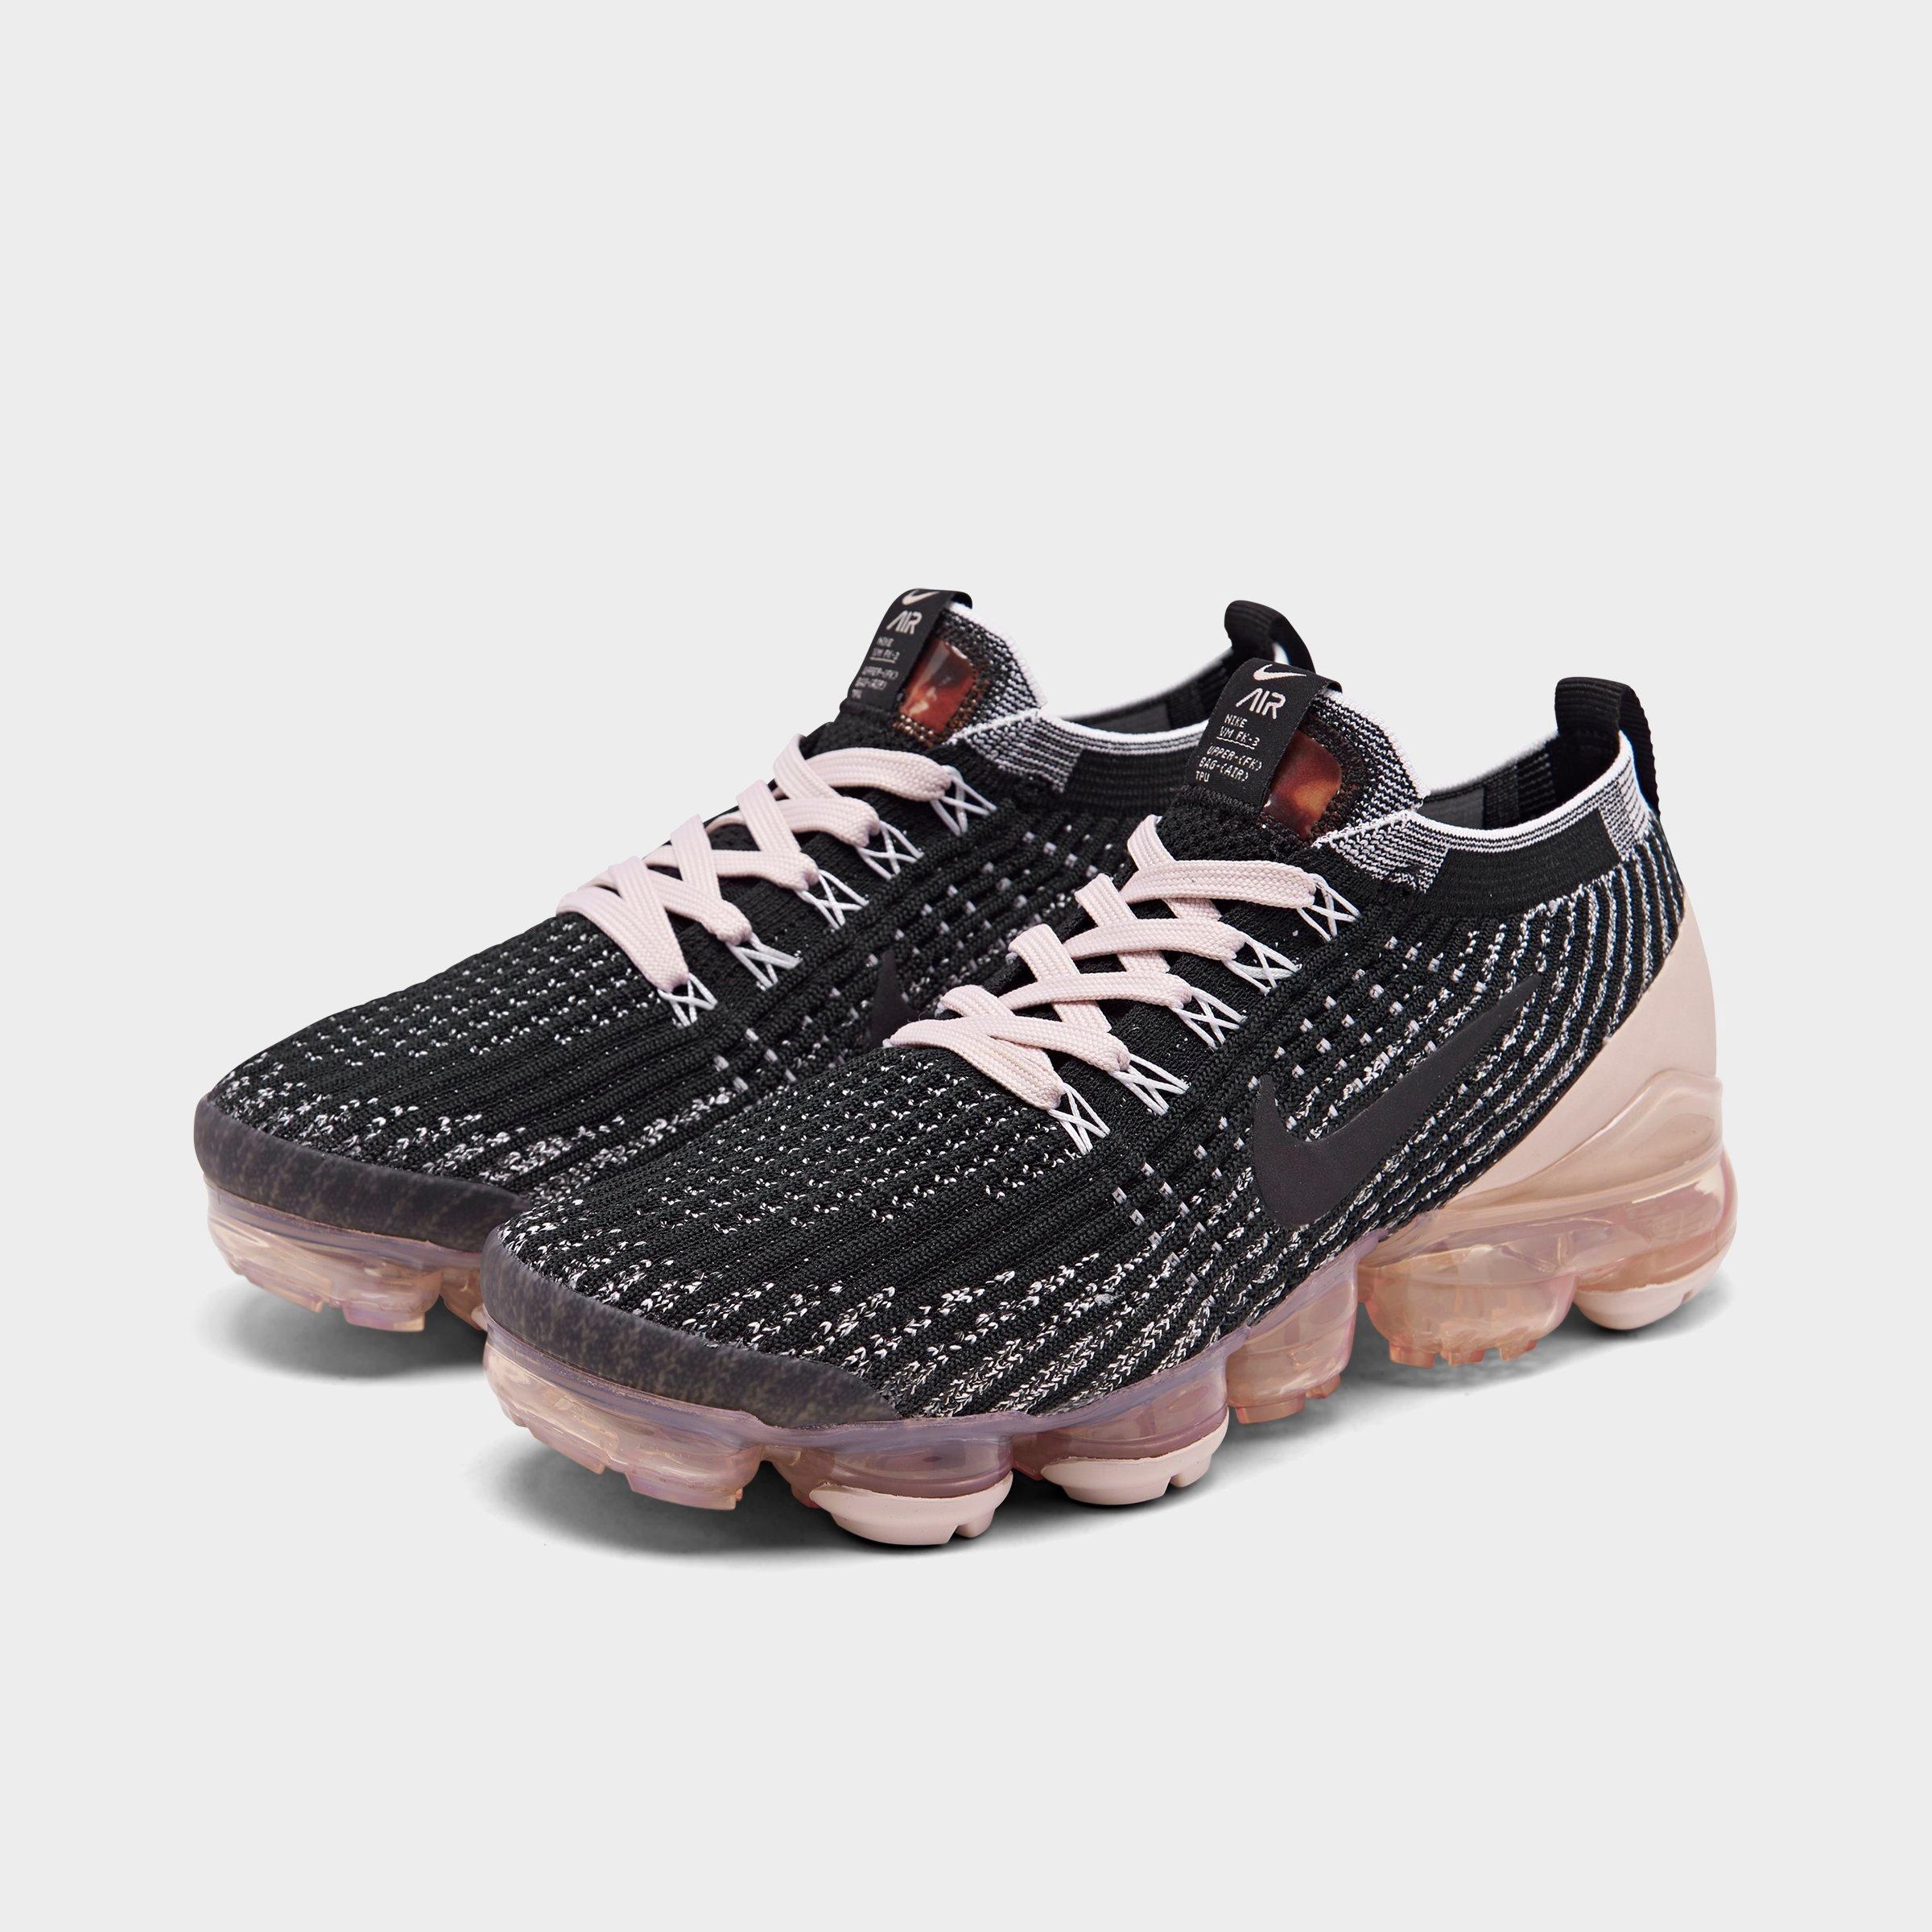 official website for sale, including vapormax plus red